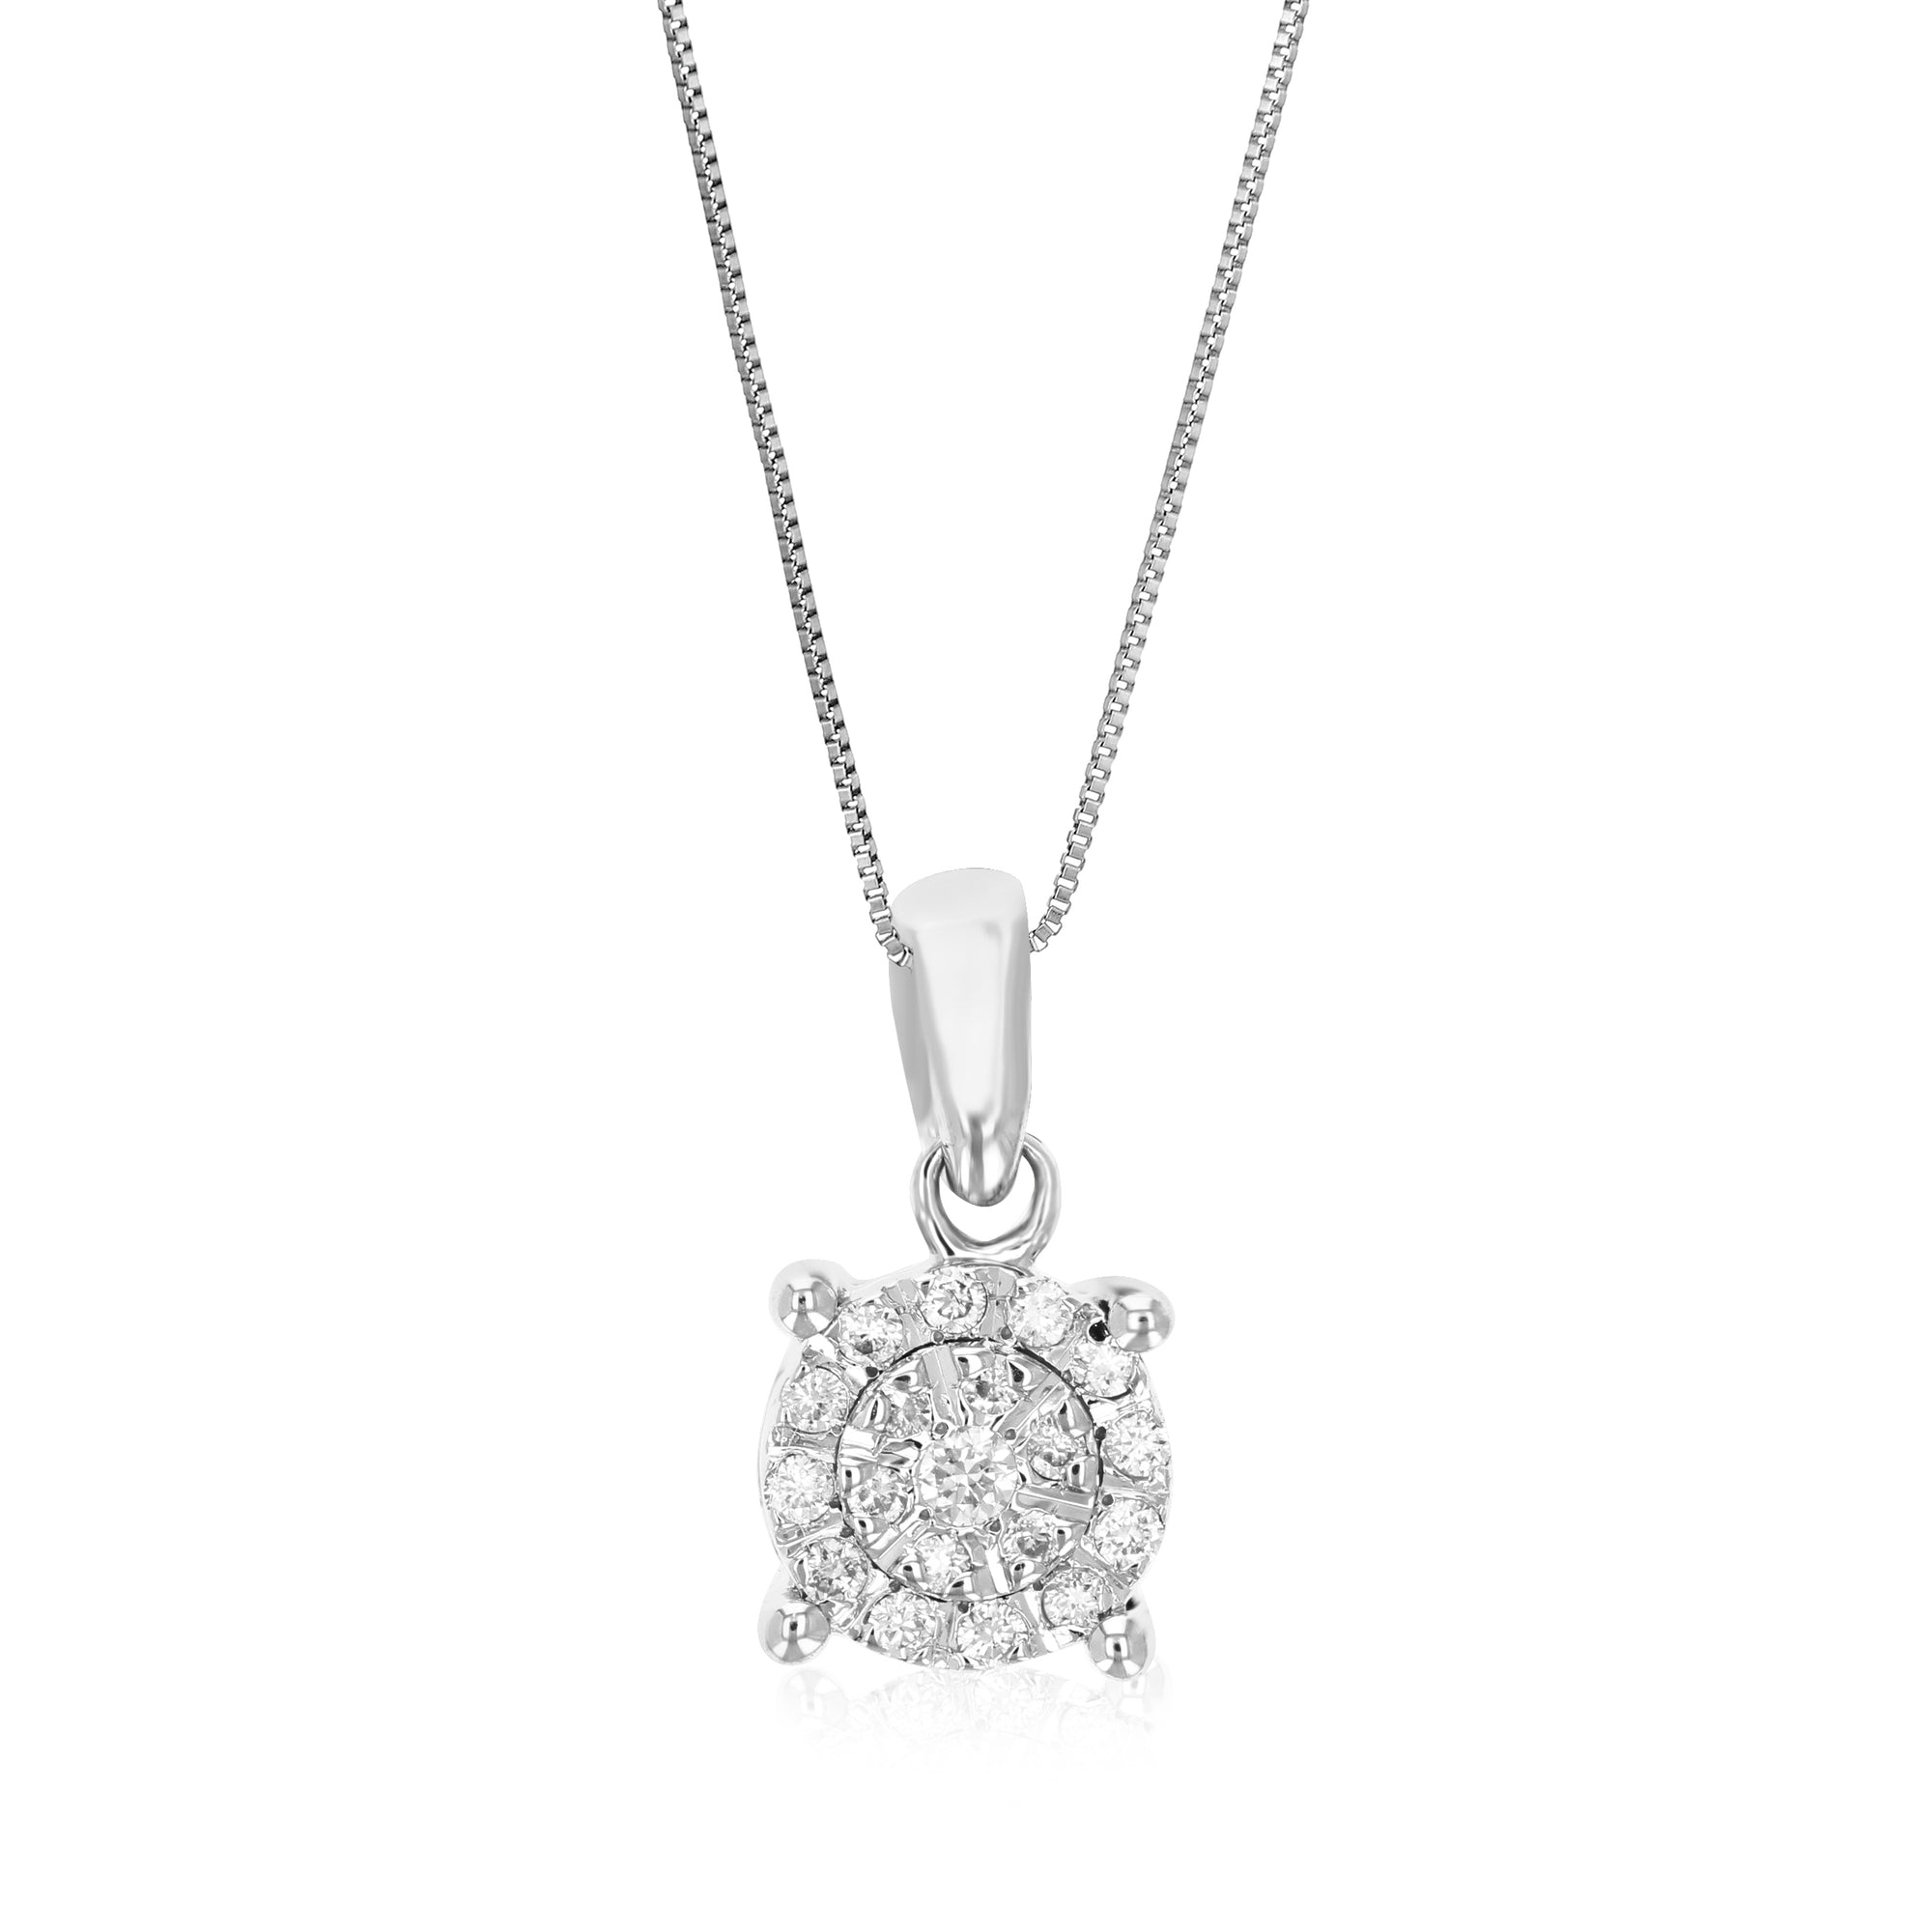 1/8 cttw Diamond Pendant Necklace for Women, Lab Grown Diamond Round Pendant Necklace in .925 Sterling Silver with Chain, Size 1/2 Inch